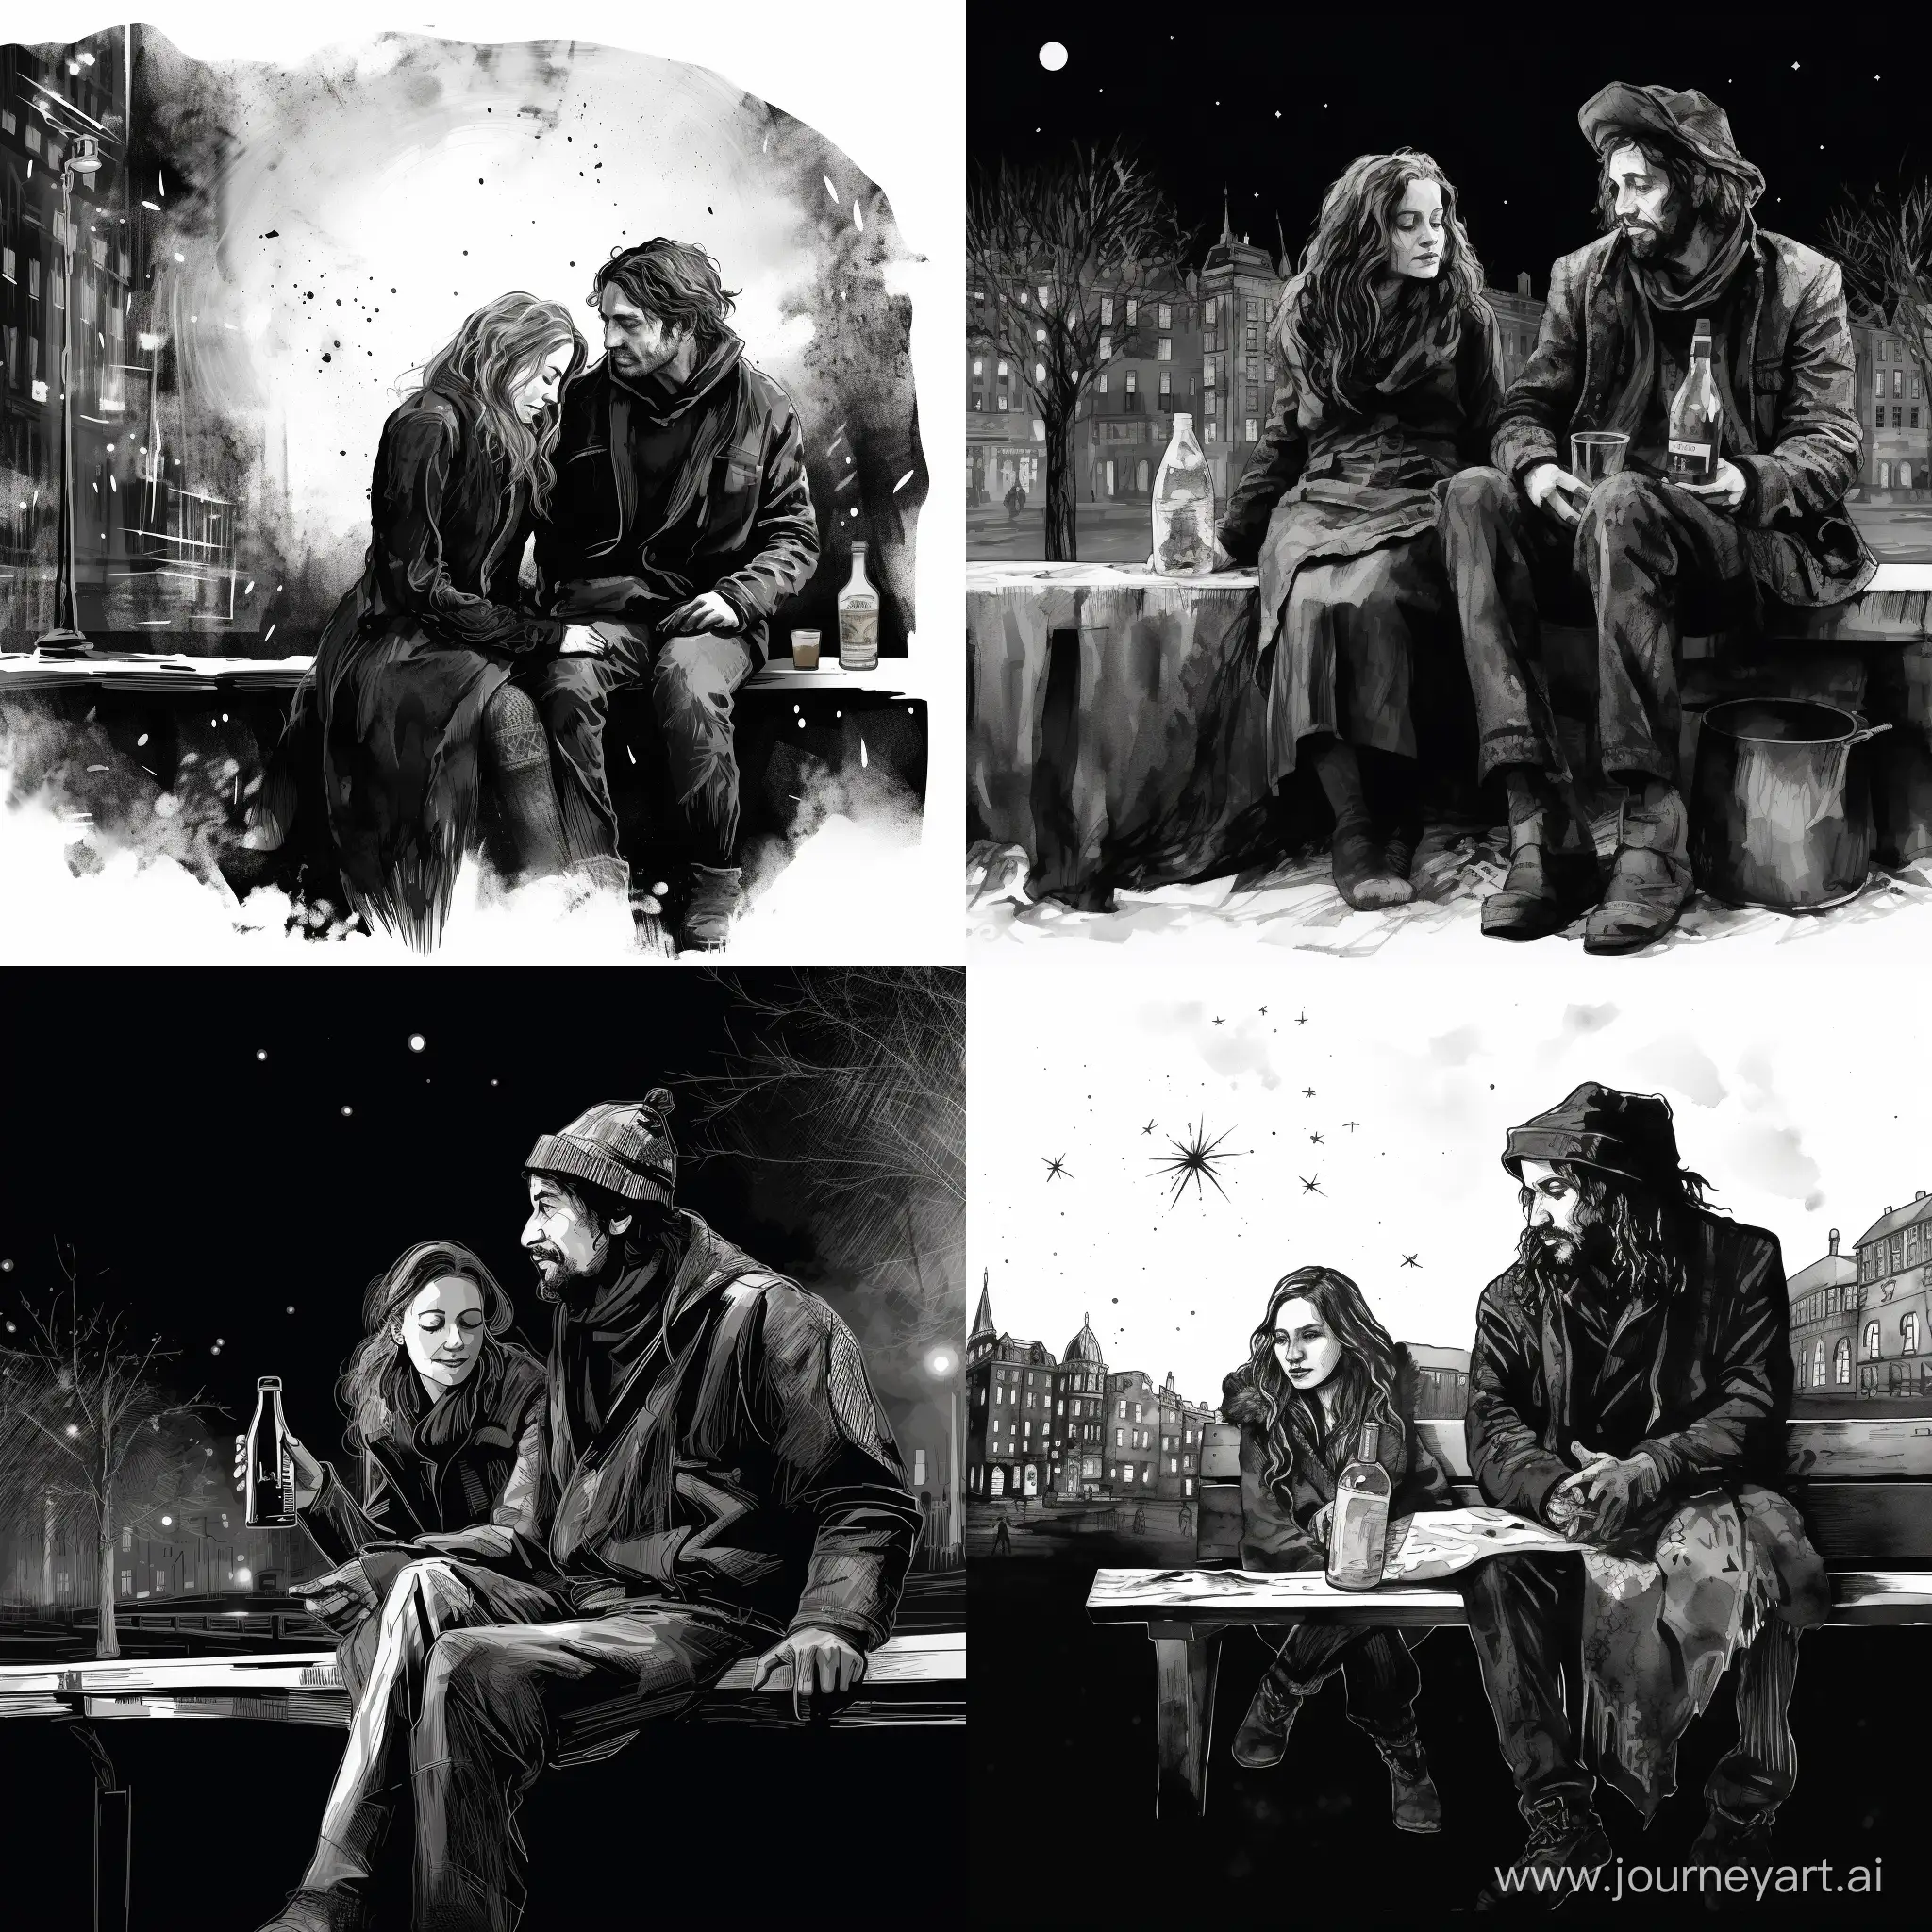 Homeless-Couple-Embracing-Winter-Night-with-Champagne